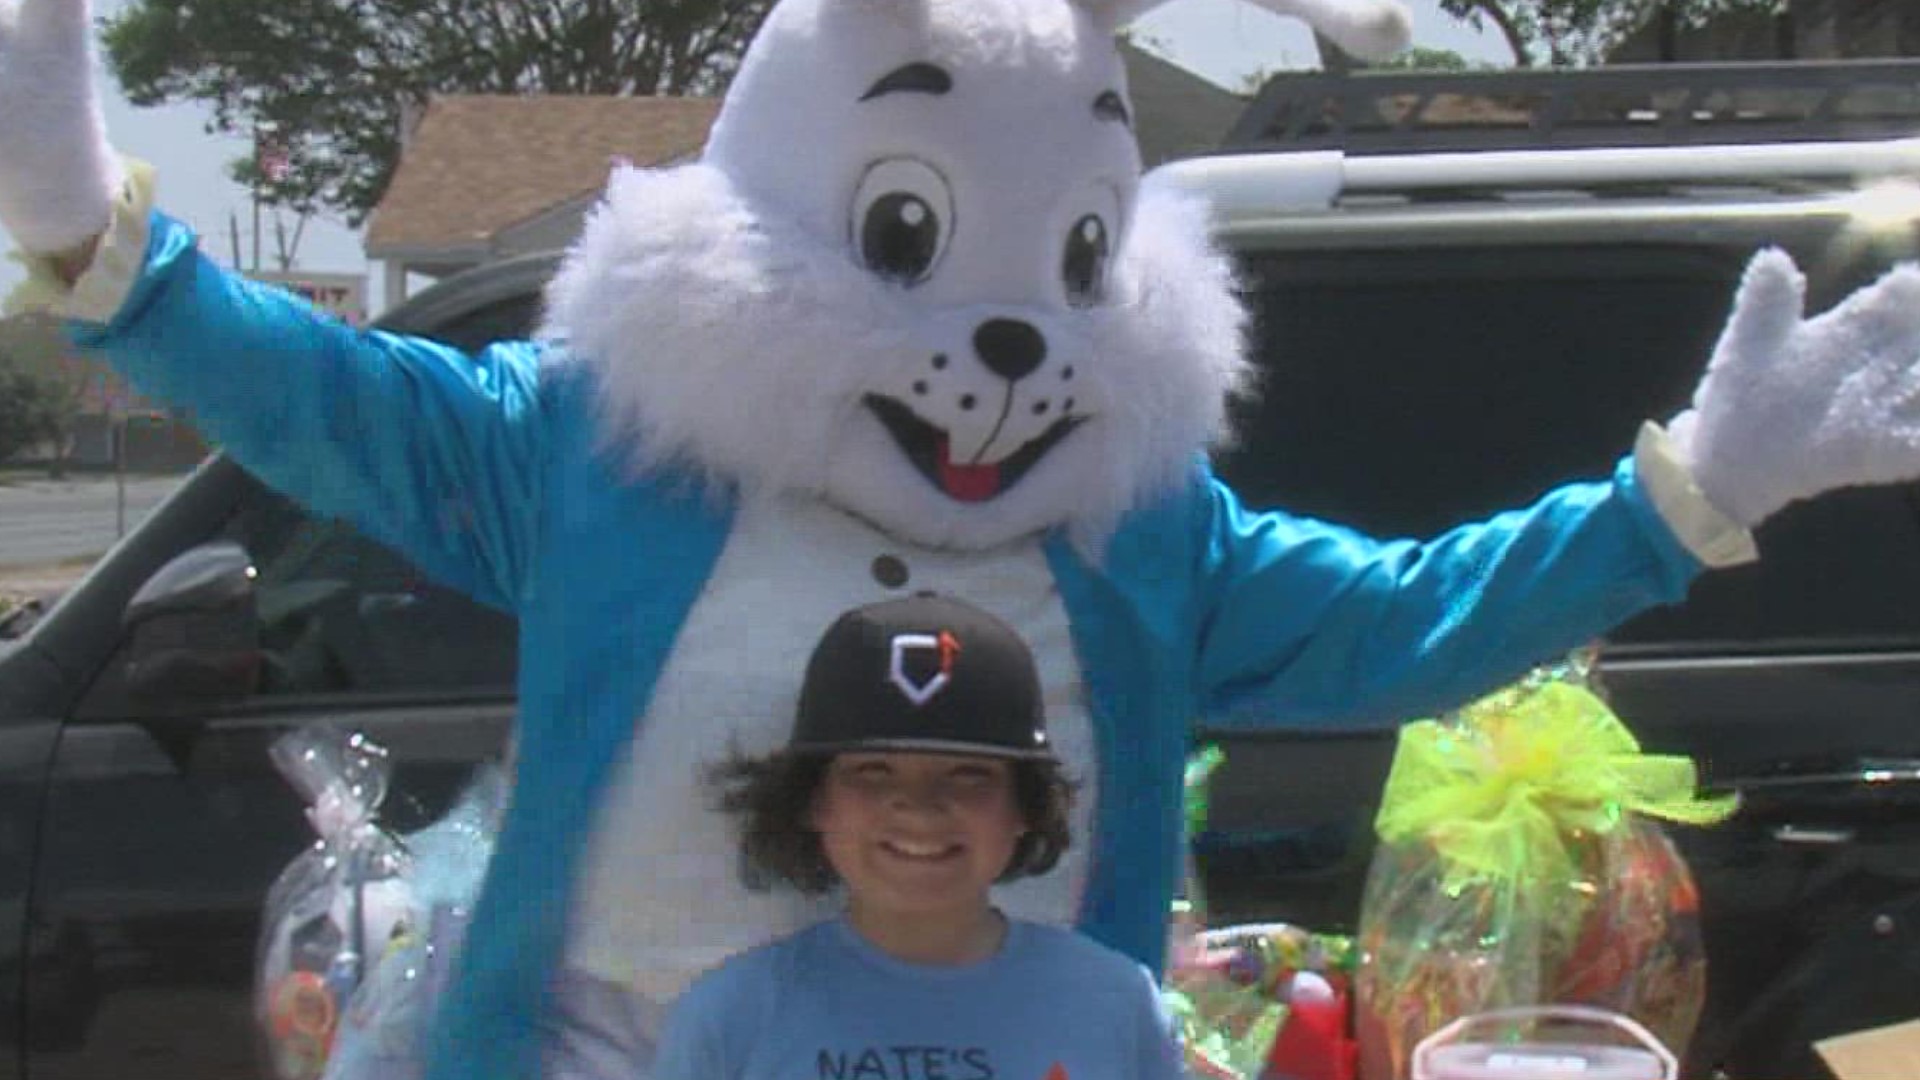 He's a familiar face in the Coastal Bend. Nate Gonzalez is putting together gift baskets for kids in need this Easter.